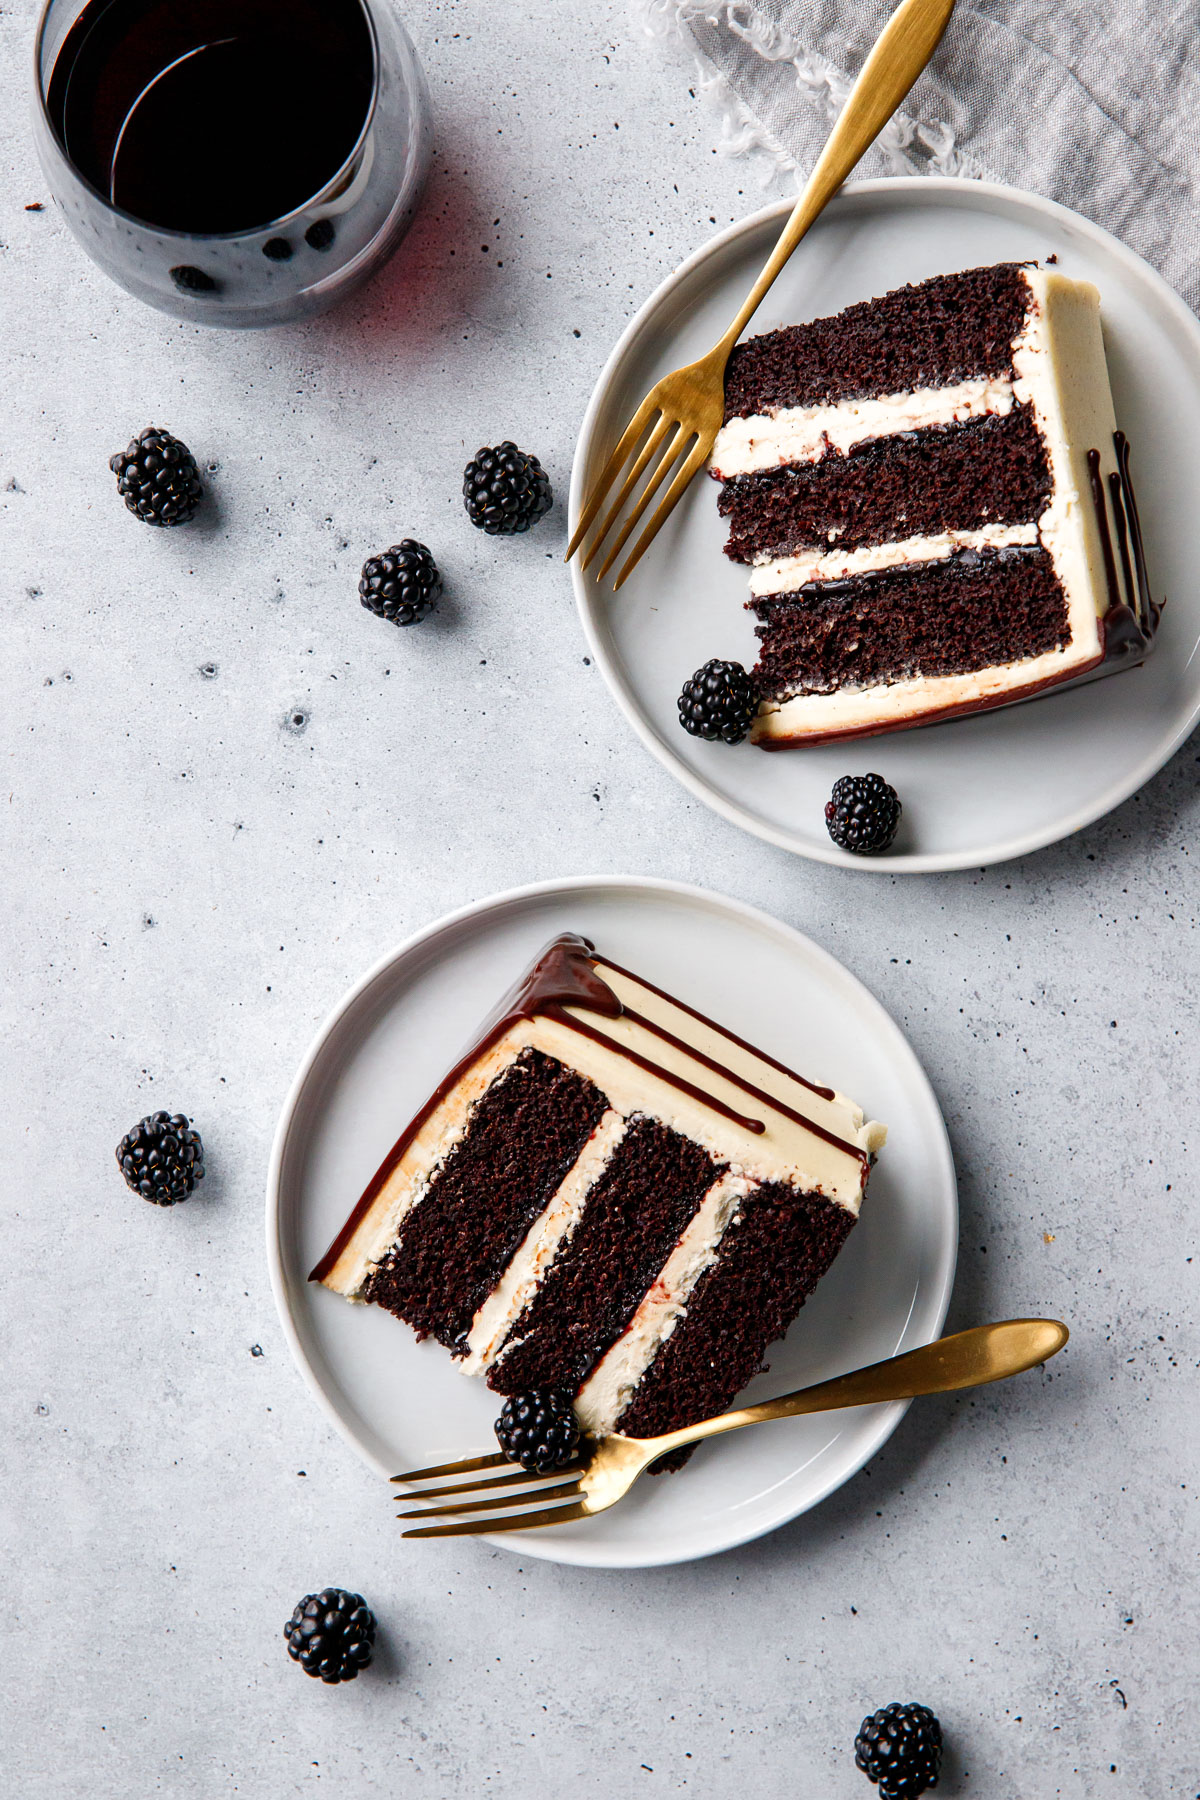 Overhead, two white plates with slices of Blackberry Red Wine Chocolate Cake laying on their sides, with gold forks, glass of red wine, and a few fresh blackberries scattered around.